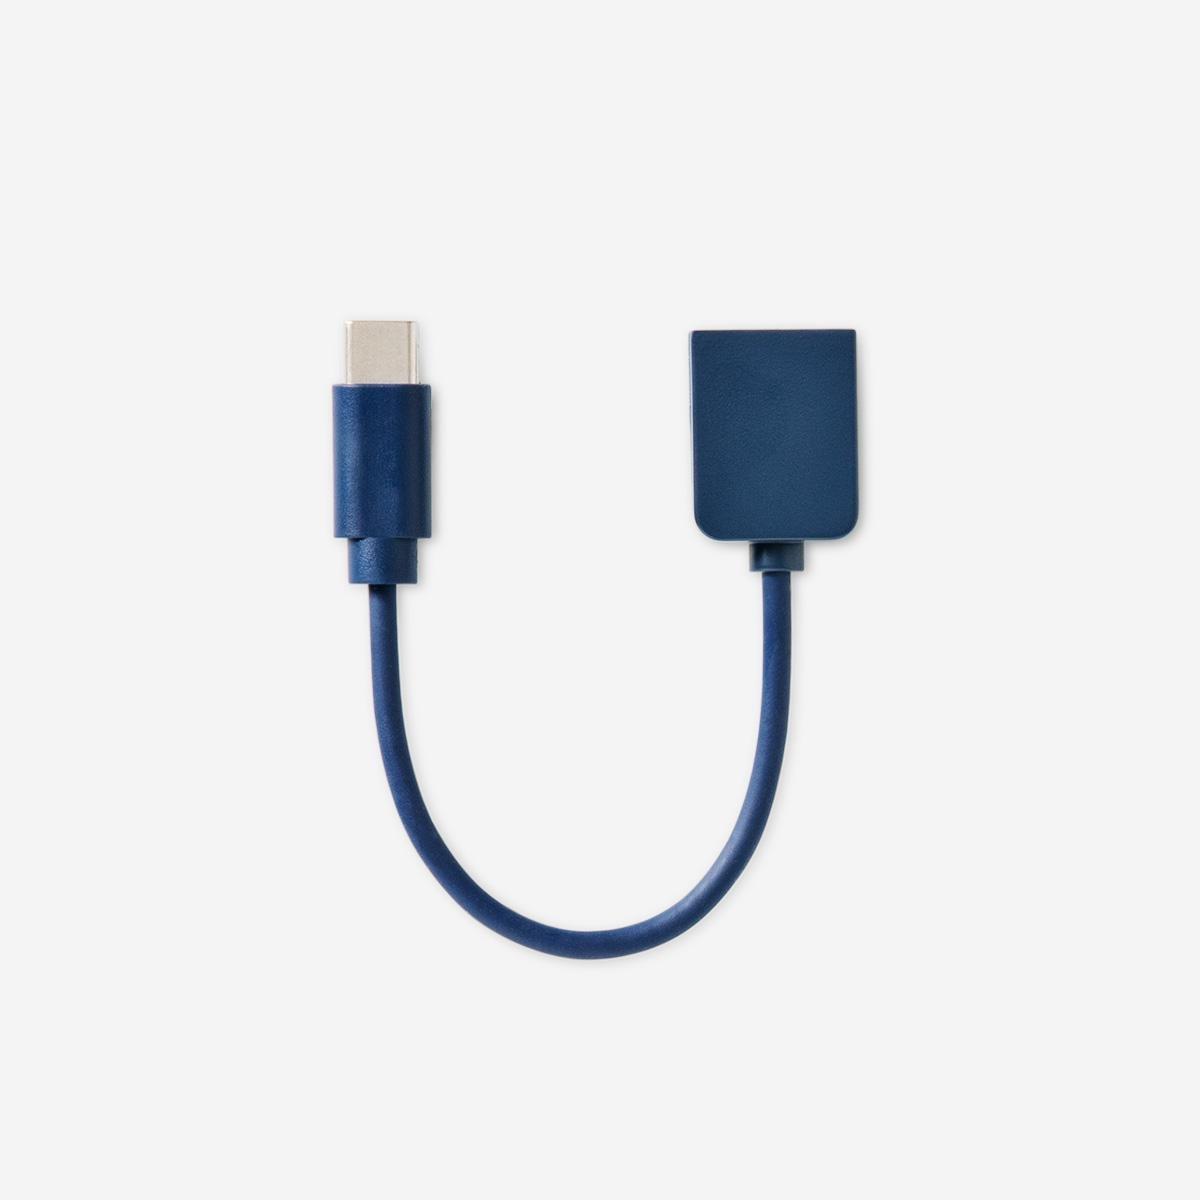 Blue connector. usb-c to usb